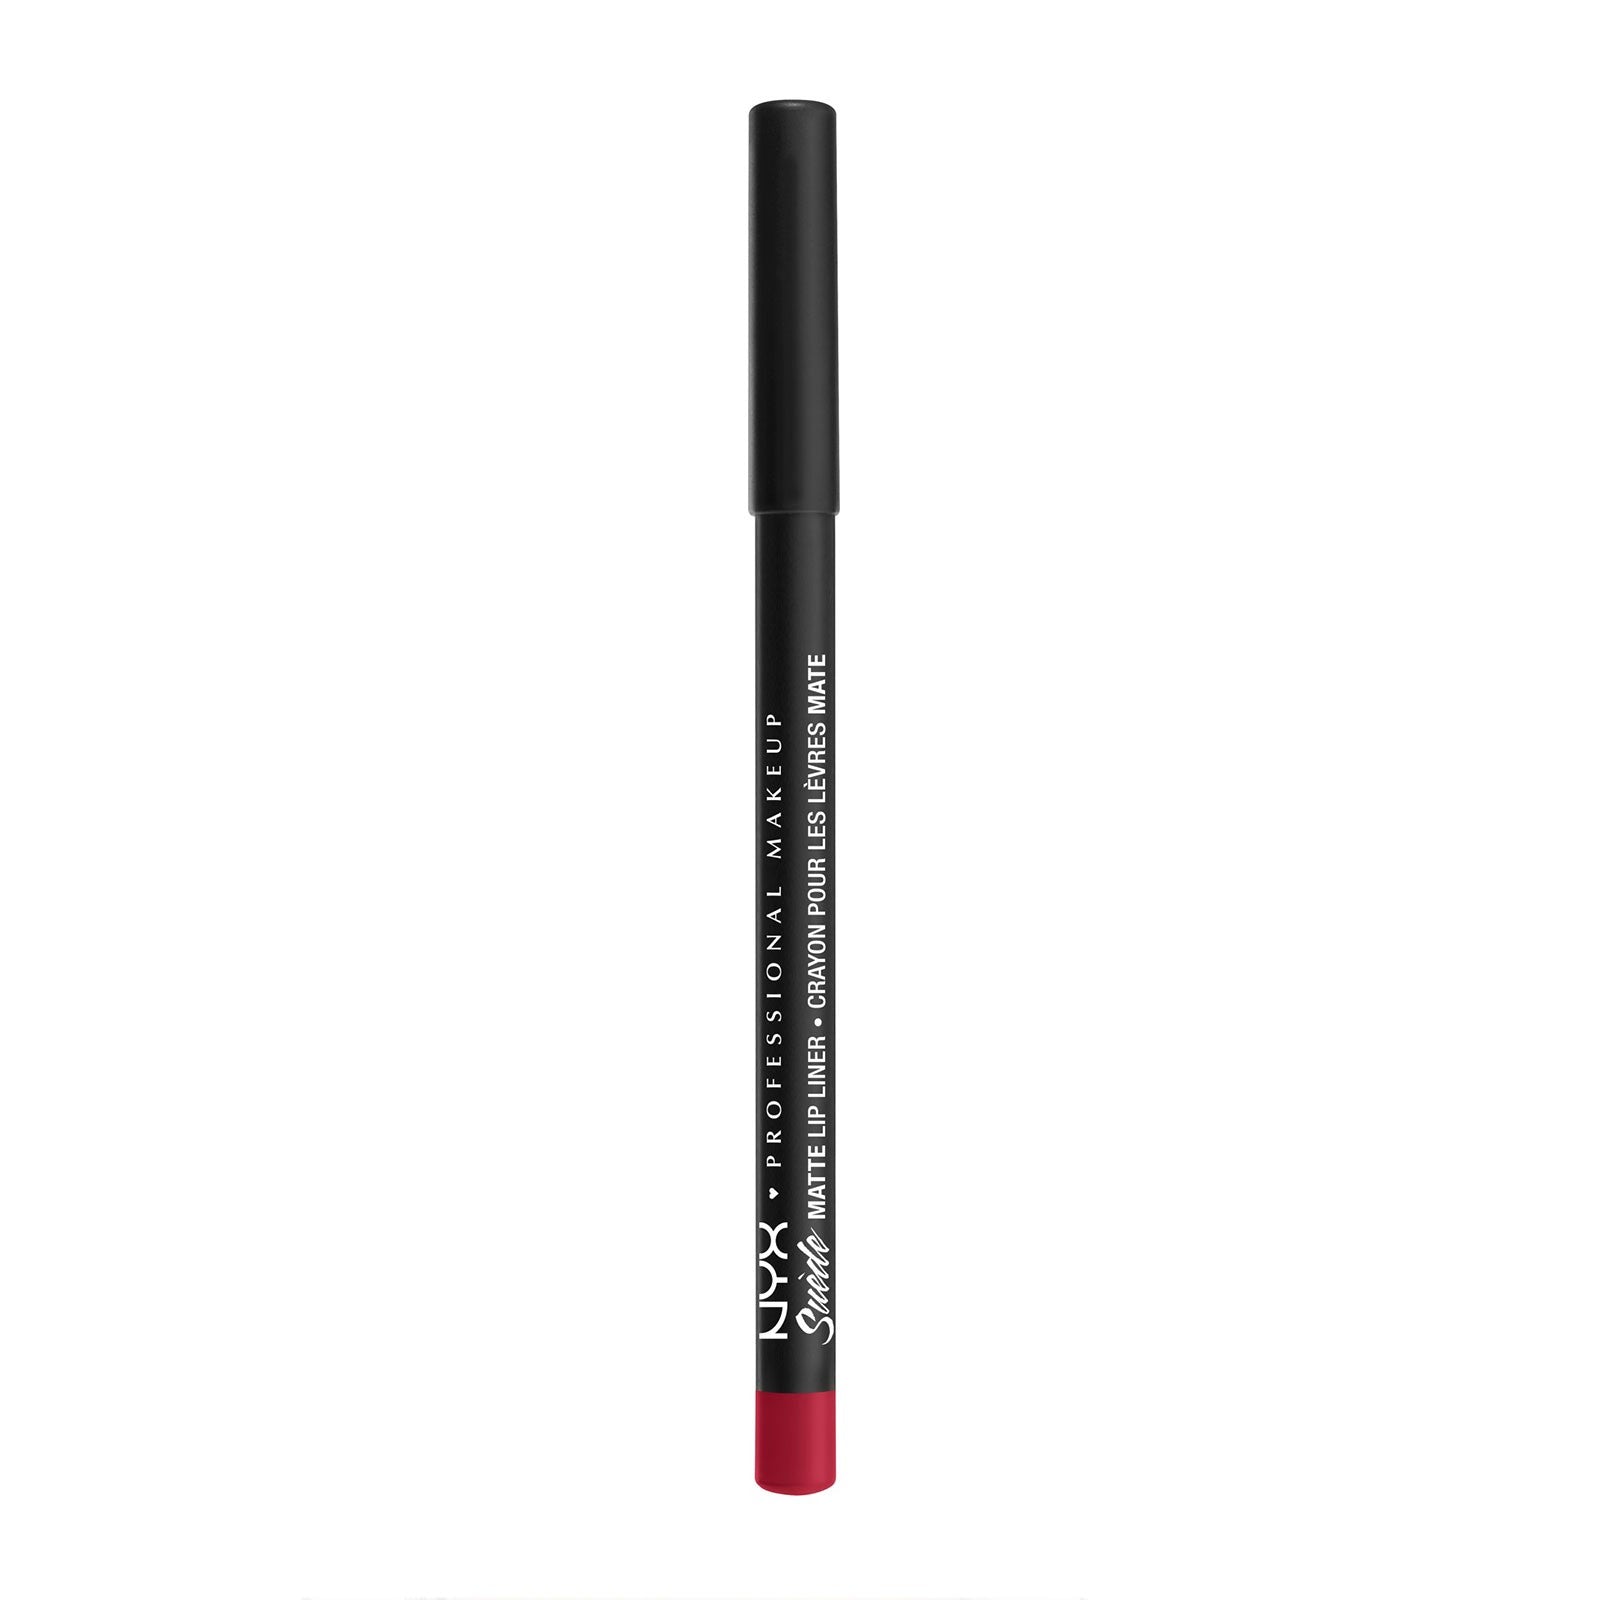 NYX Suede Matte Lip Liner Pencil SMLL57 Spicy 1g oh-so-pretty lip liners were literally made to match those powdery-matte lippies. Every velvety shade goes on smoothly and provides a perfect matte base.